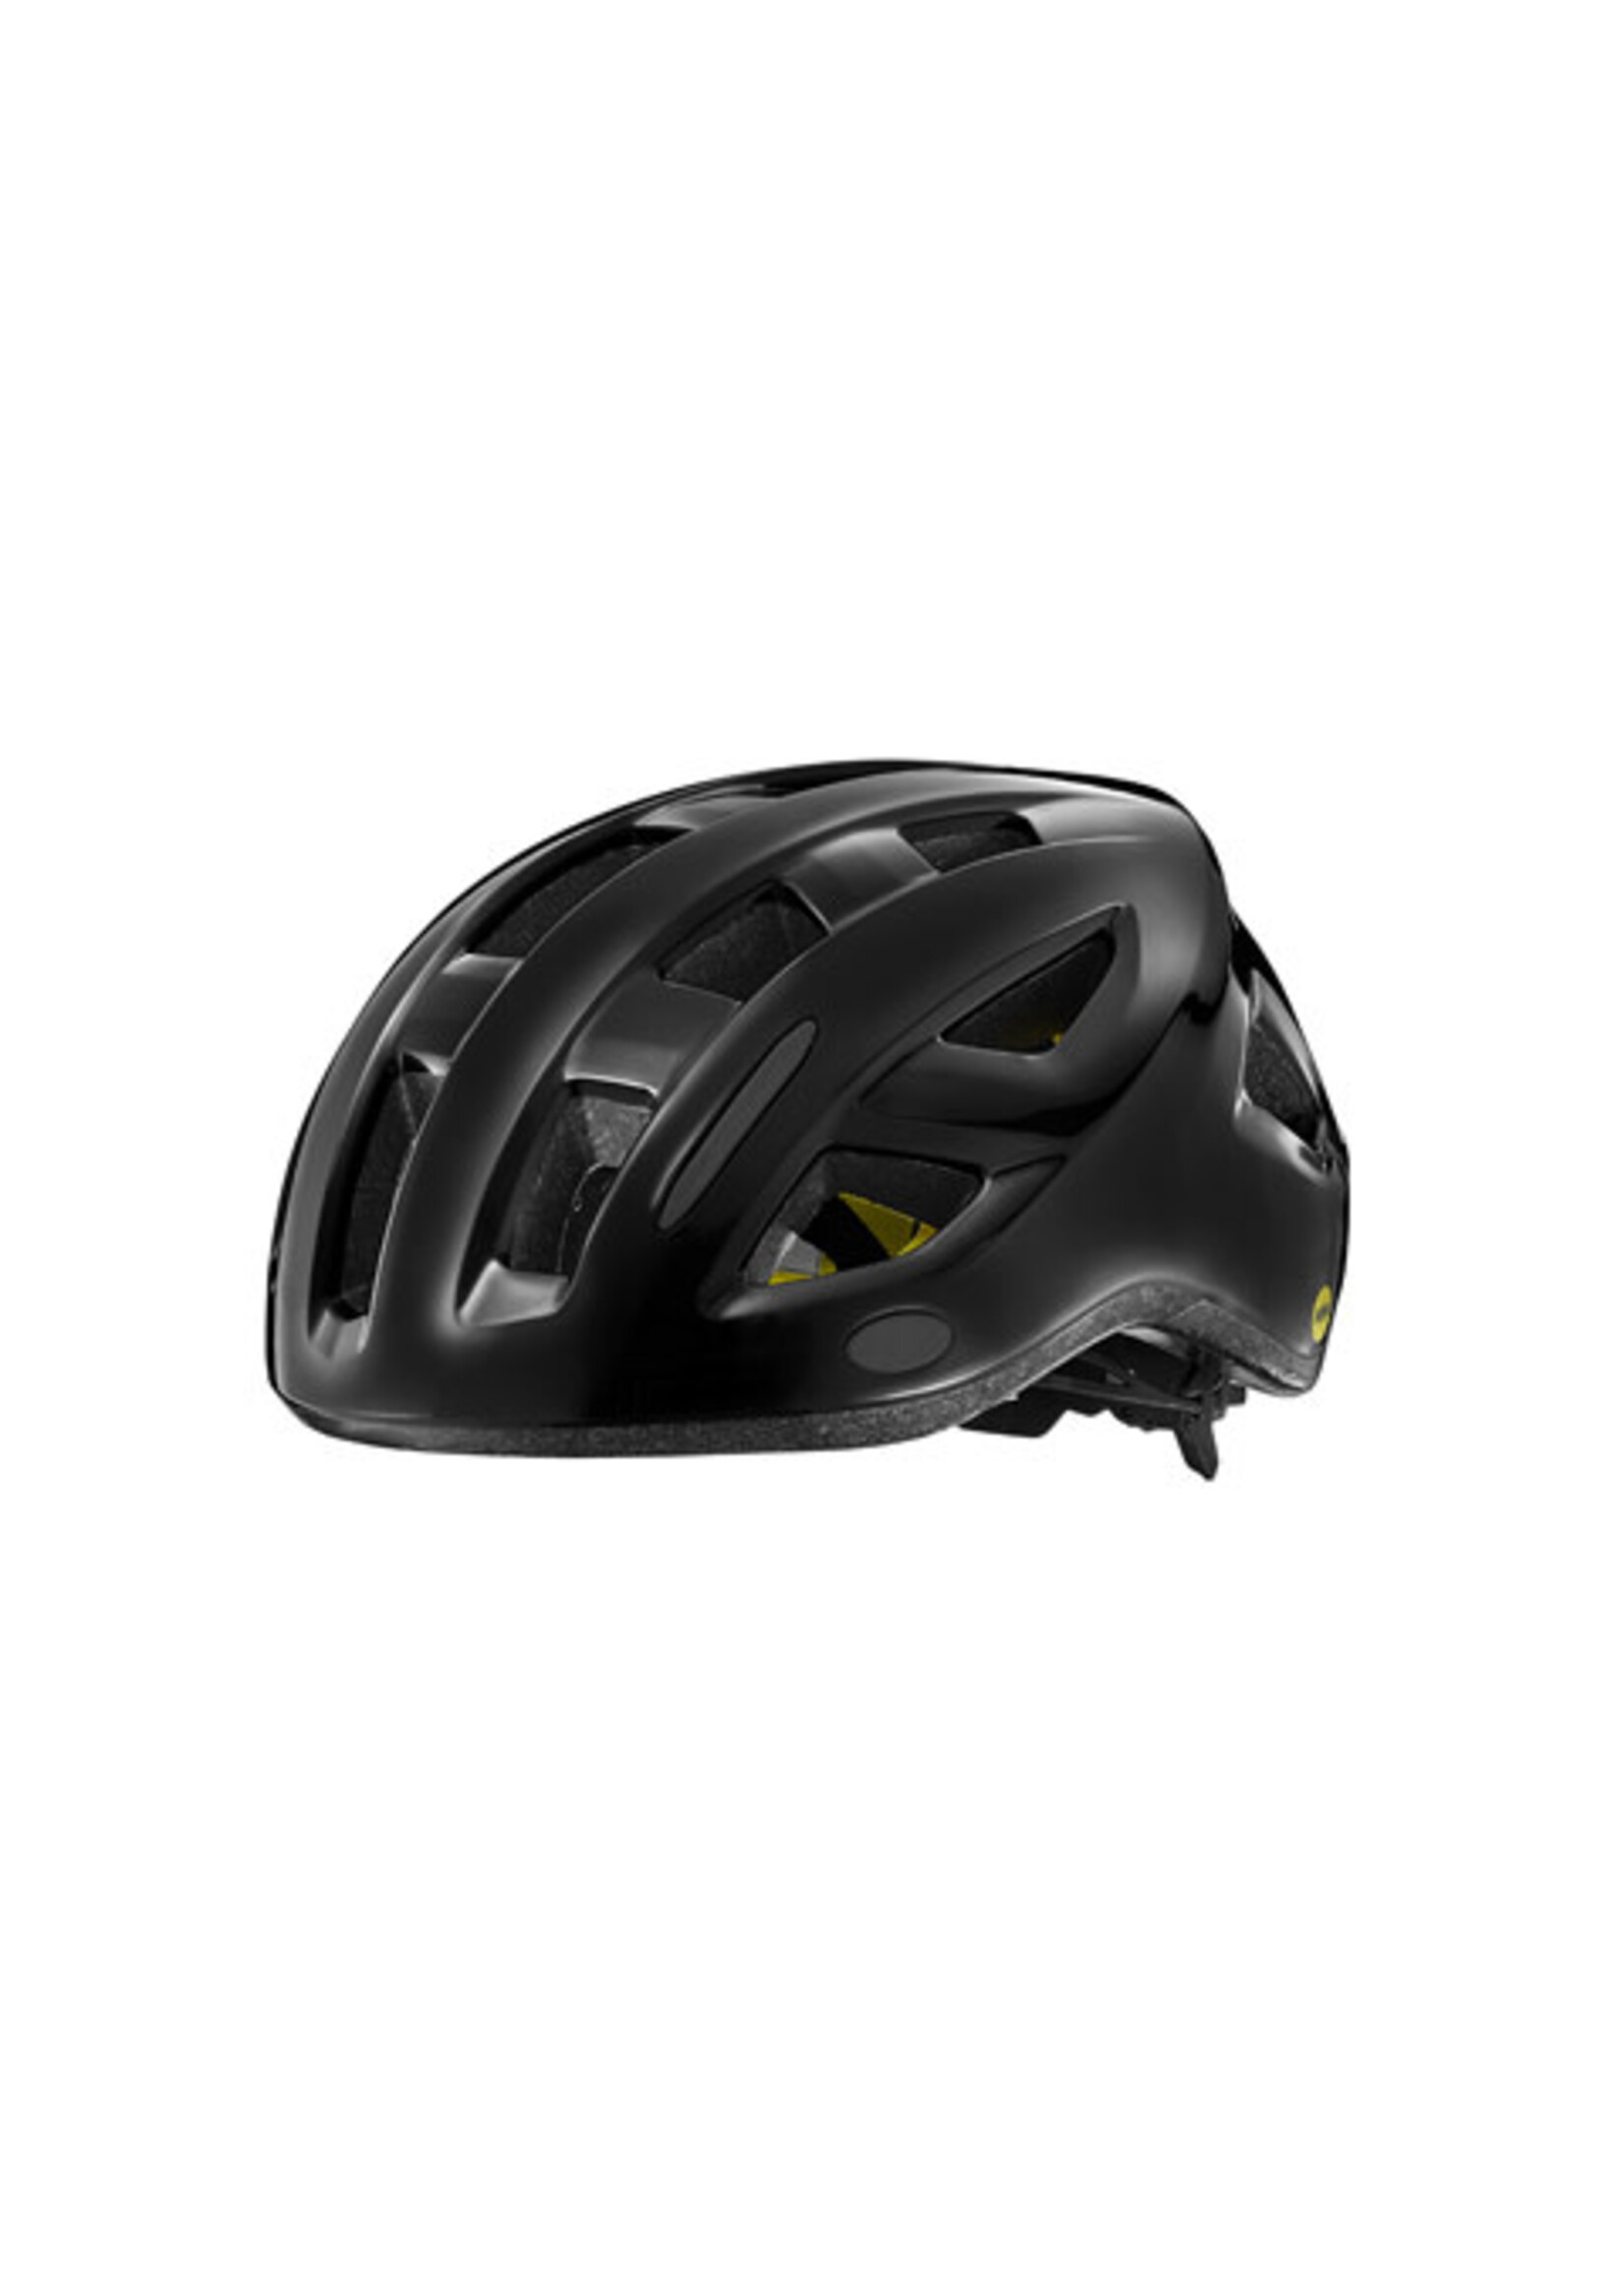 Giant LIV Relay MIPS Helmet S/M Gloss Panther Black